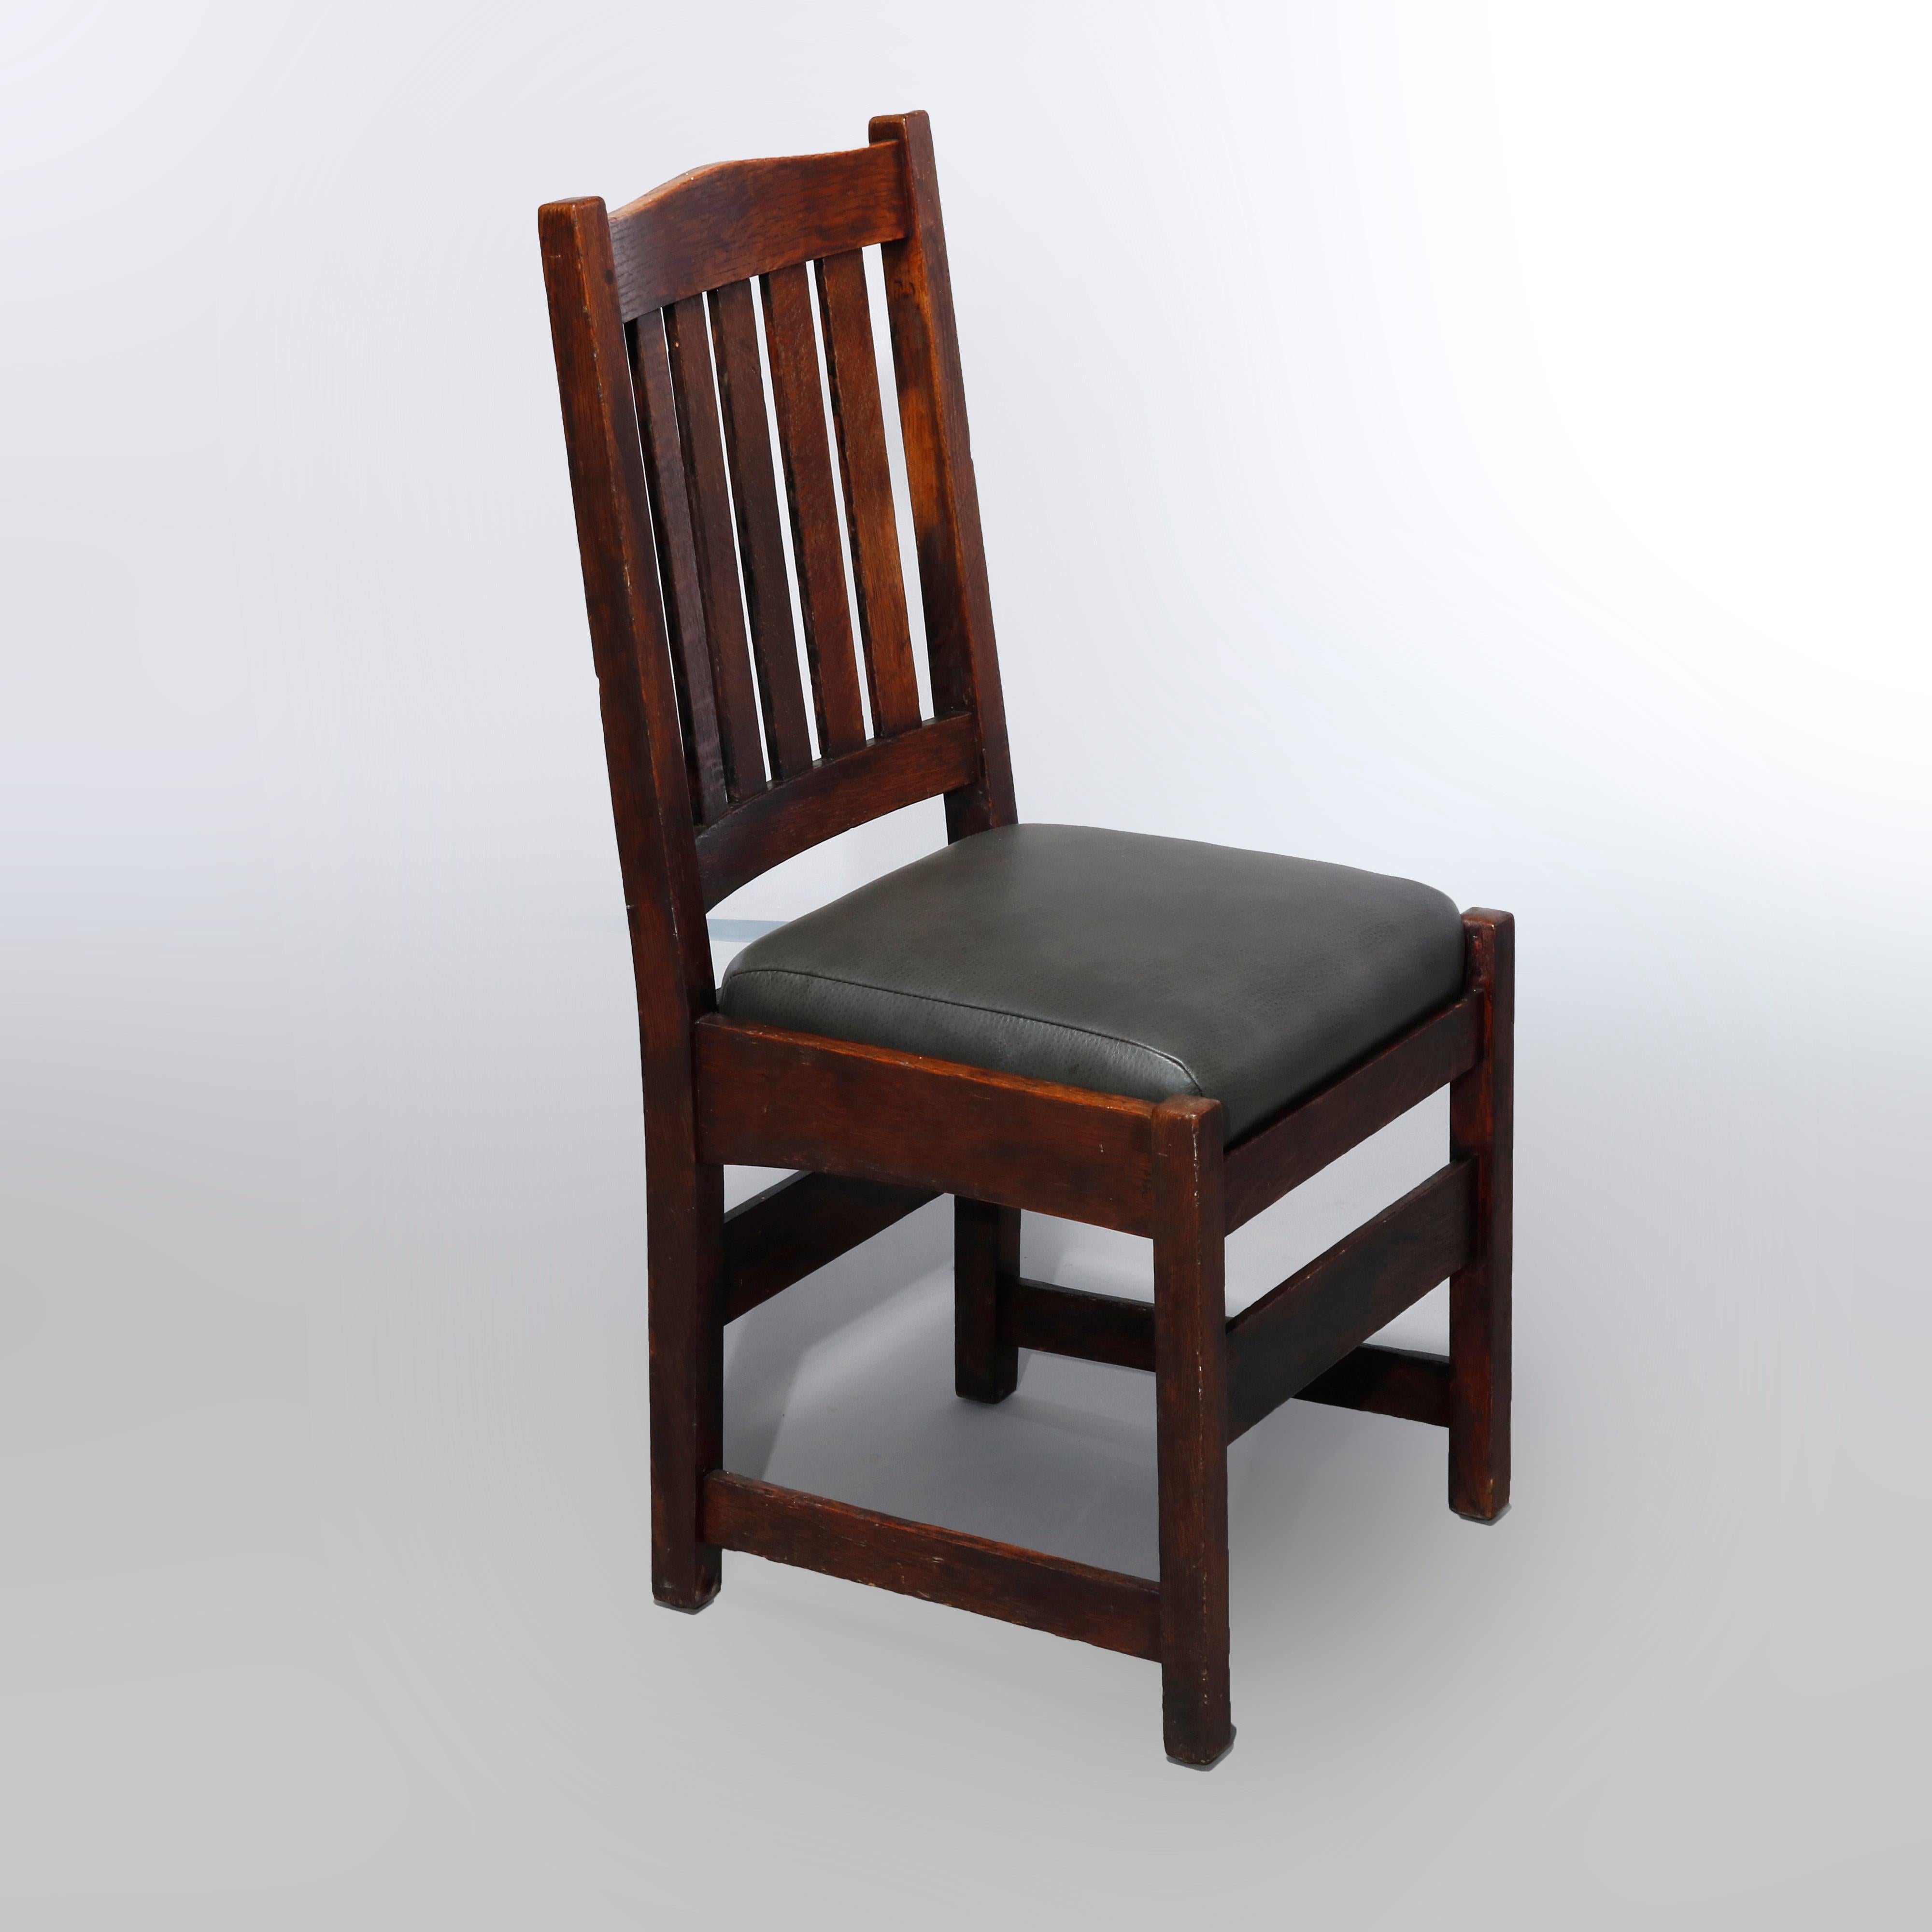 American Four Arts & Crafts L&JG Stickley Mission Oak & Leather Dining Chairs, c1910